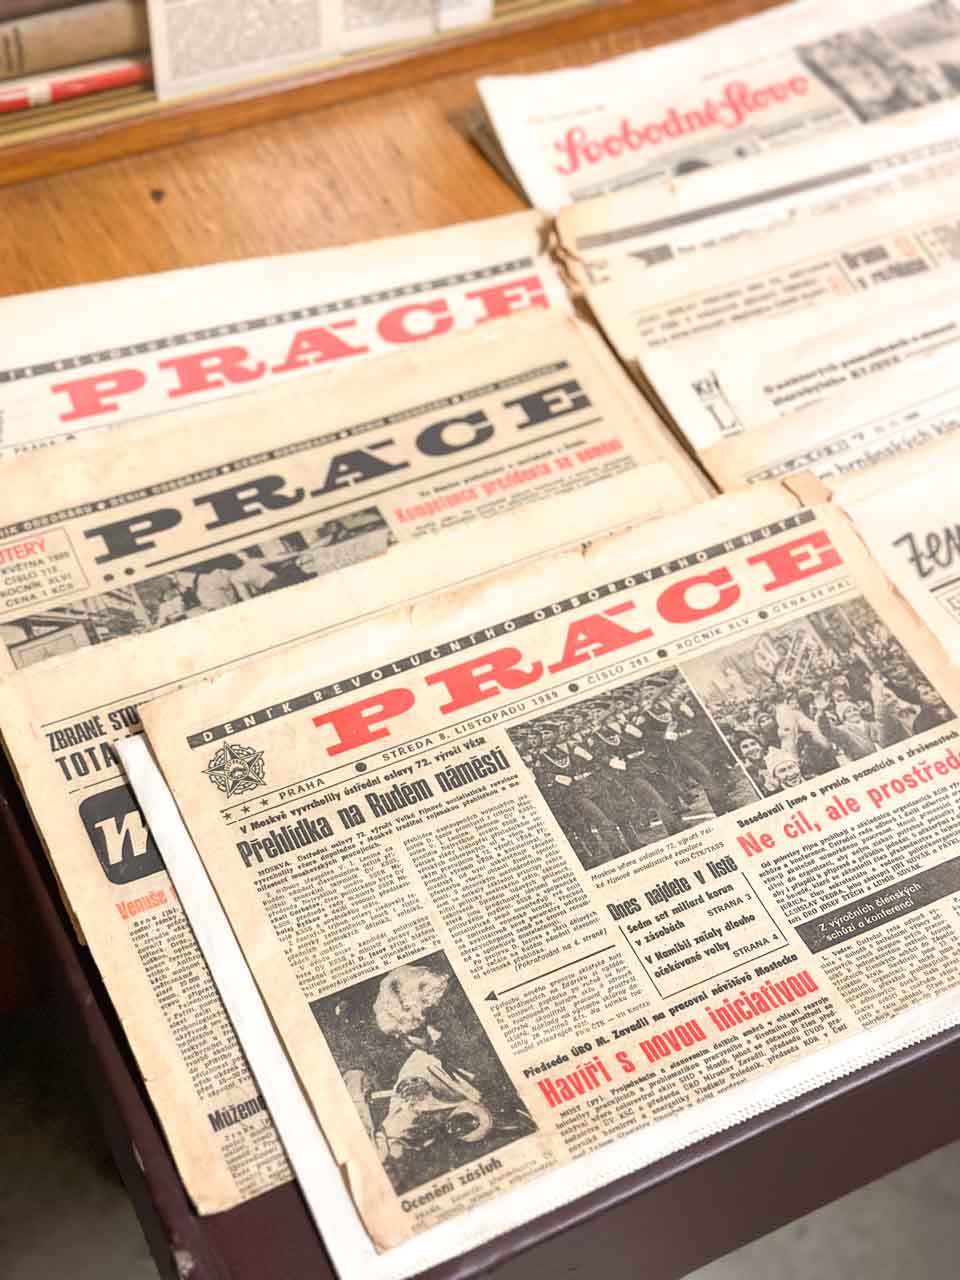 Vintage Czech newspapers on a wooden table